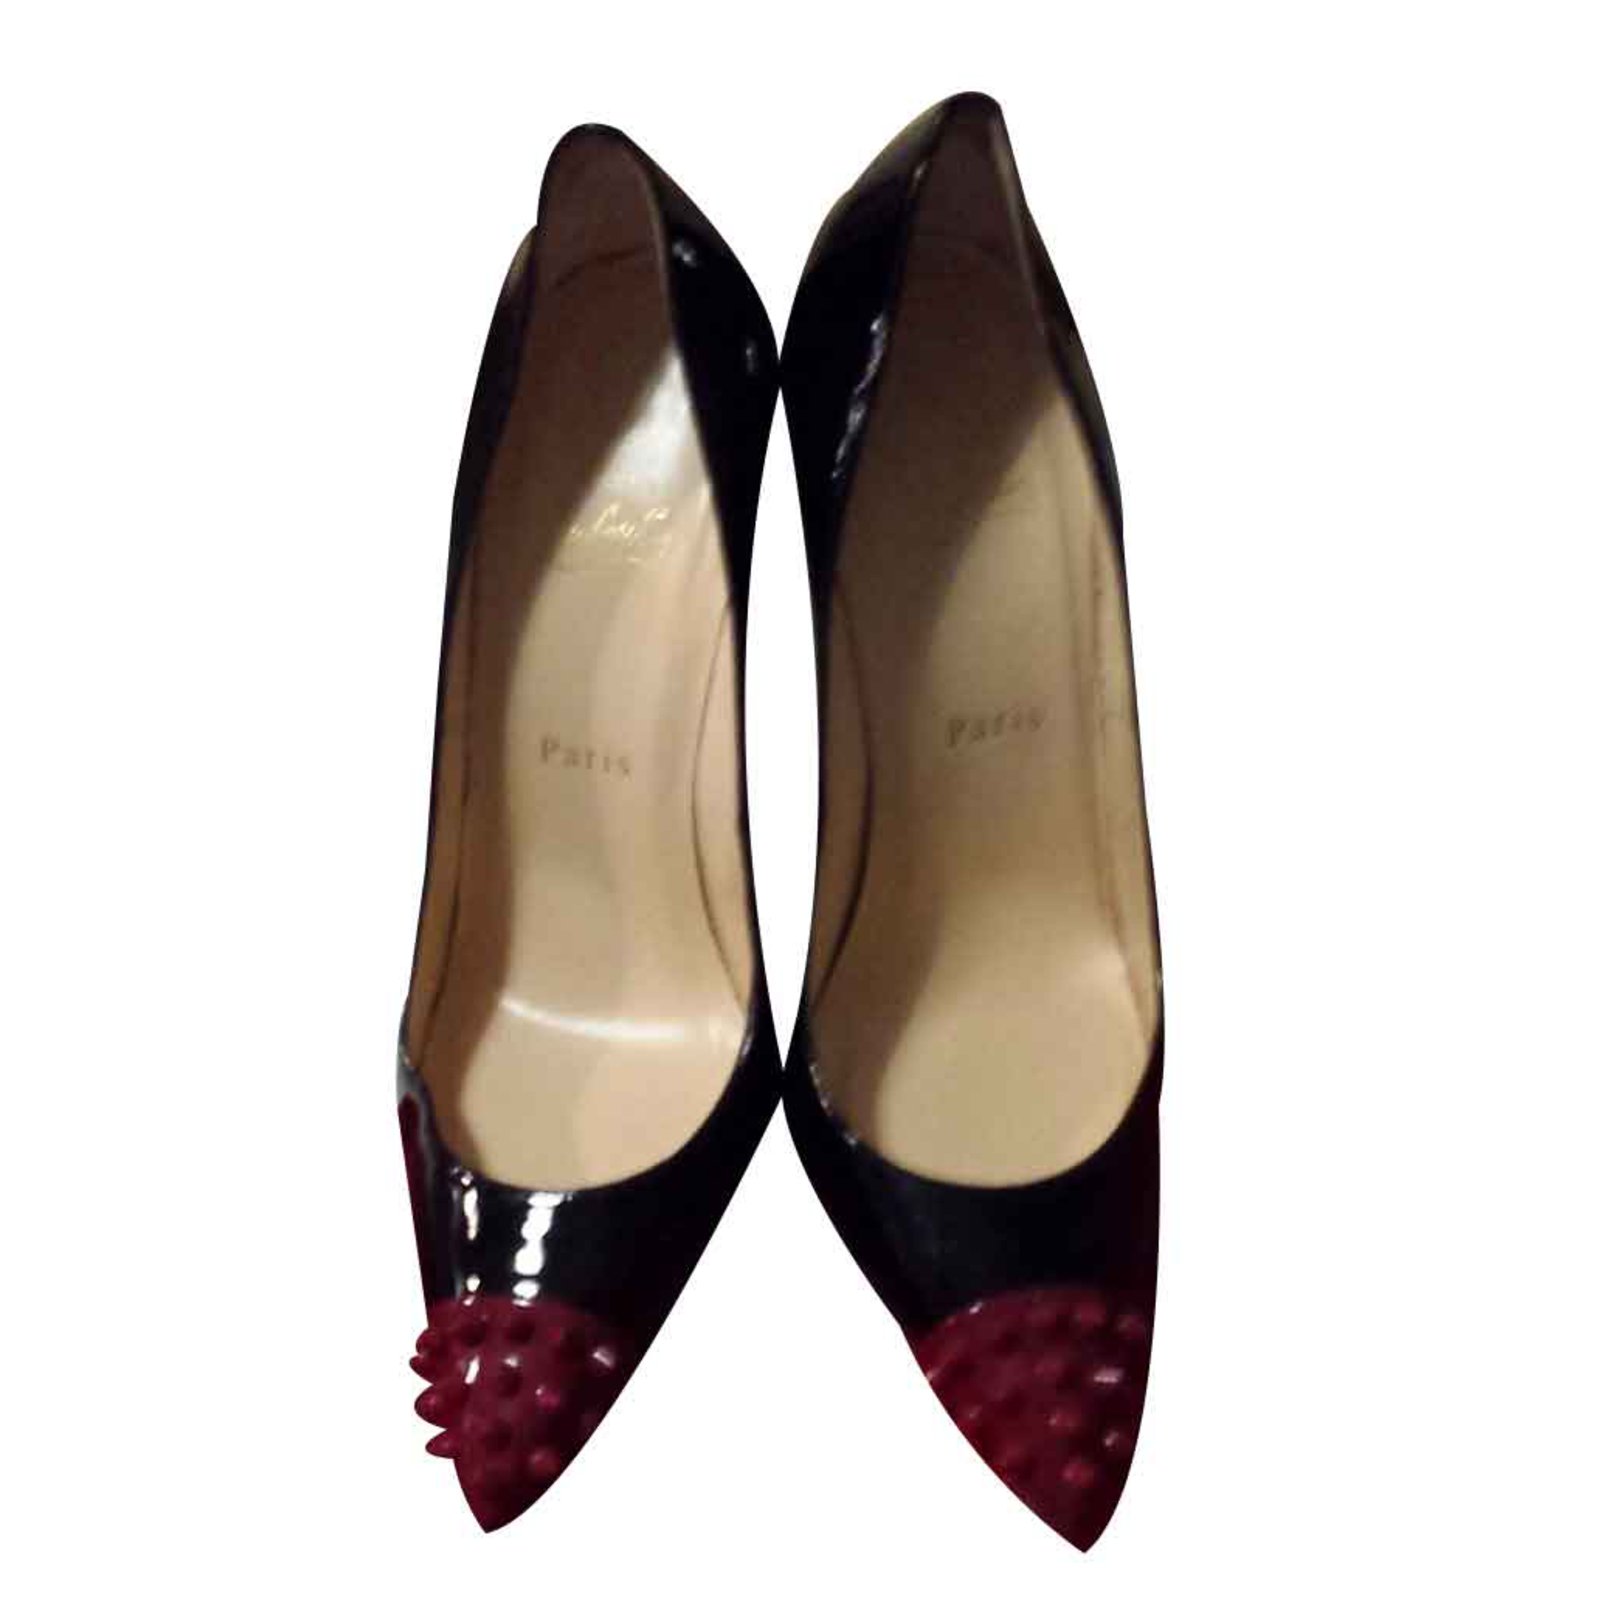 Christian Louboutin Heels - 'Spike' Black Patent leather ref.21843